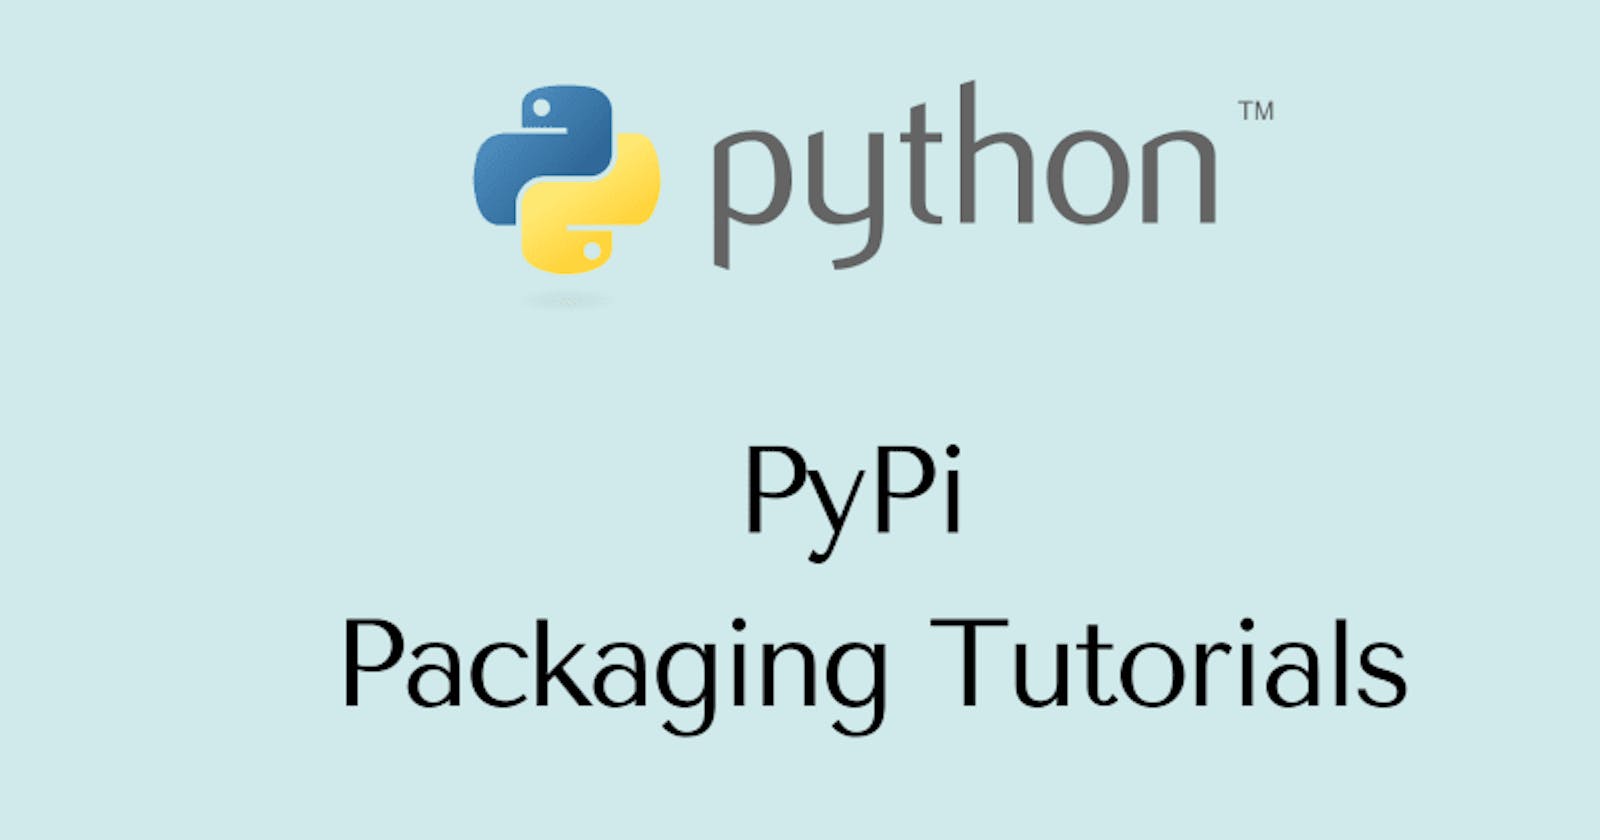 Packaging and Publishing on PyPI